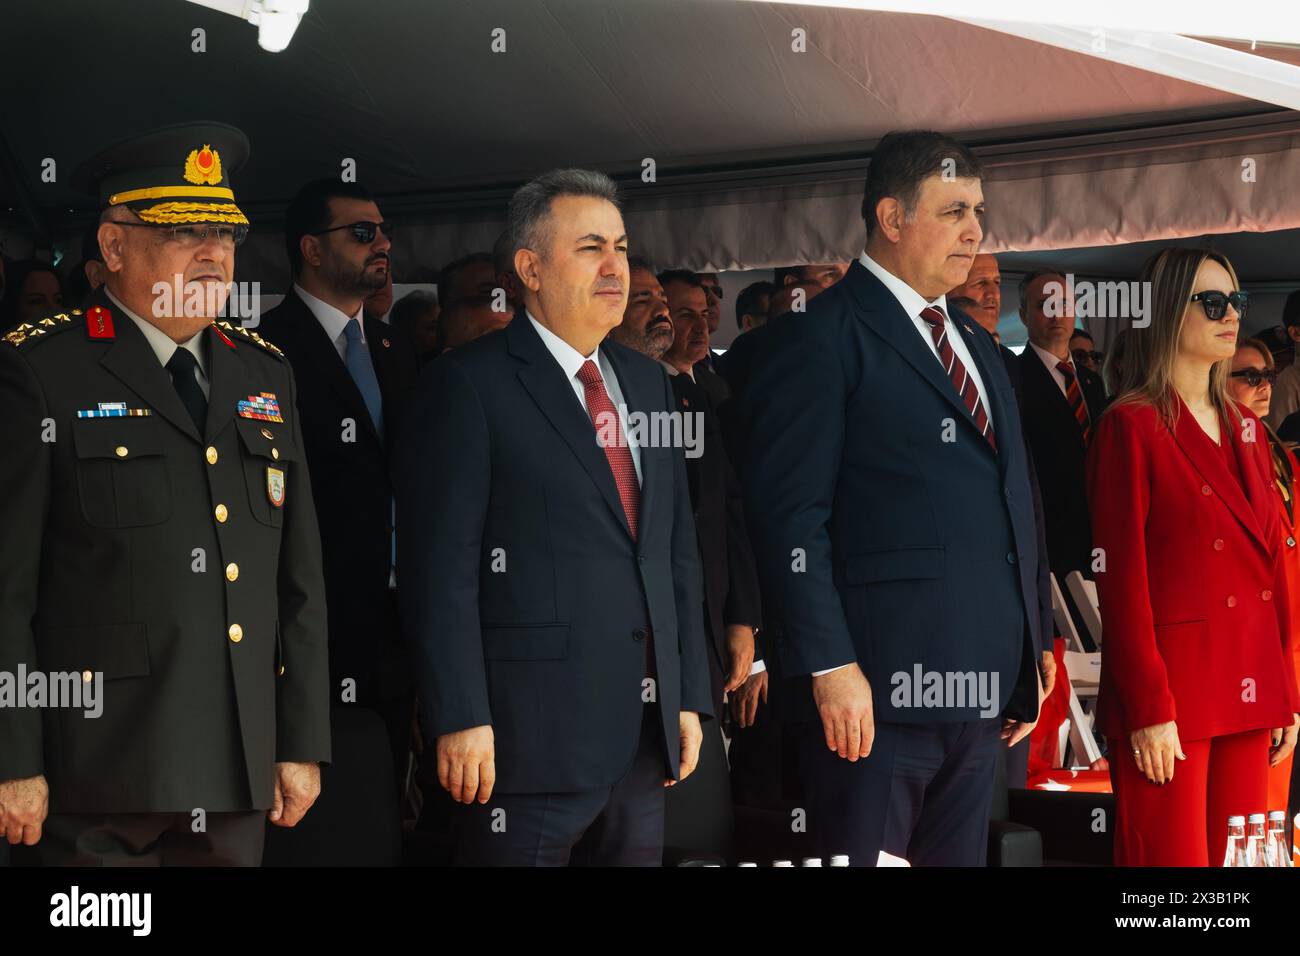 Izmir, Turkey - April 23, 2024: High ranking officials, including the commander of the 1st Army 3rd Corps General Kemal Yeni, Izmir Mayor Cemil Tugay, Stock Photo